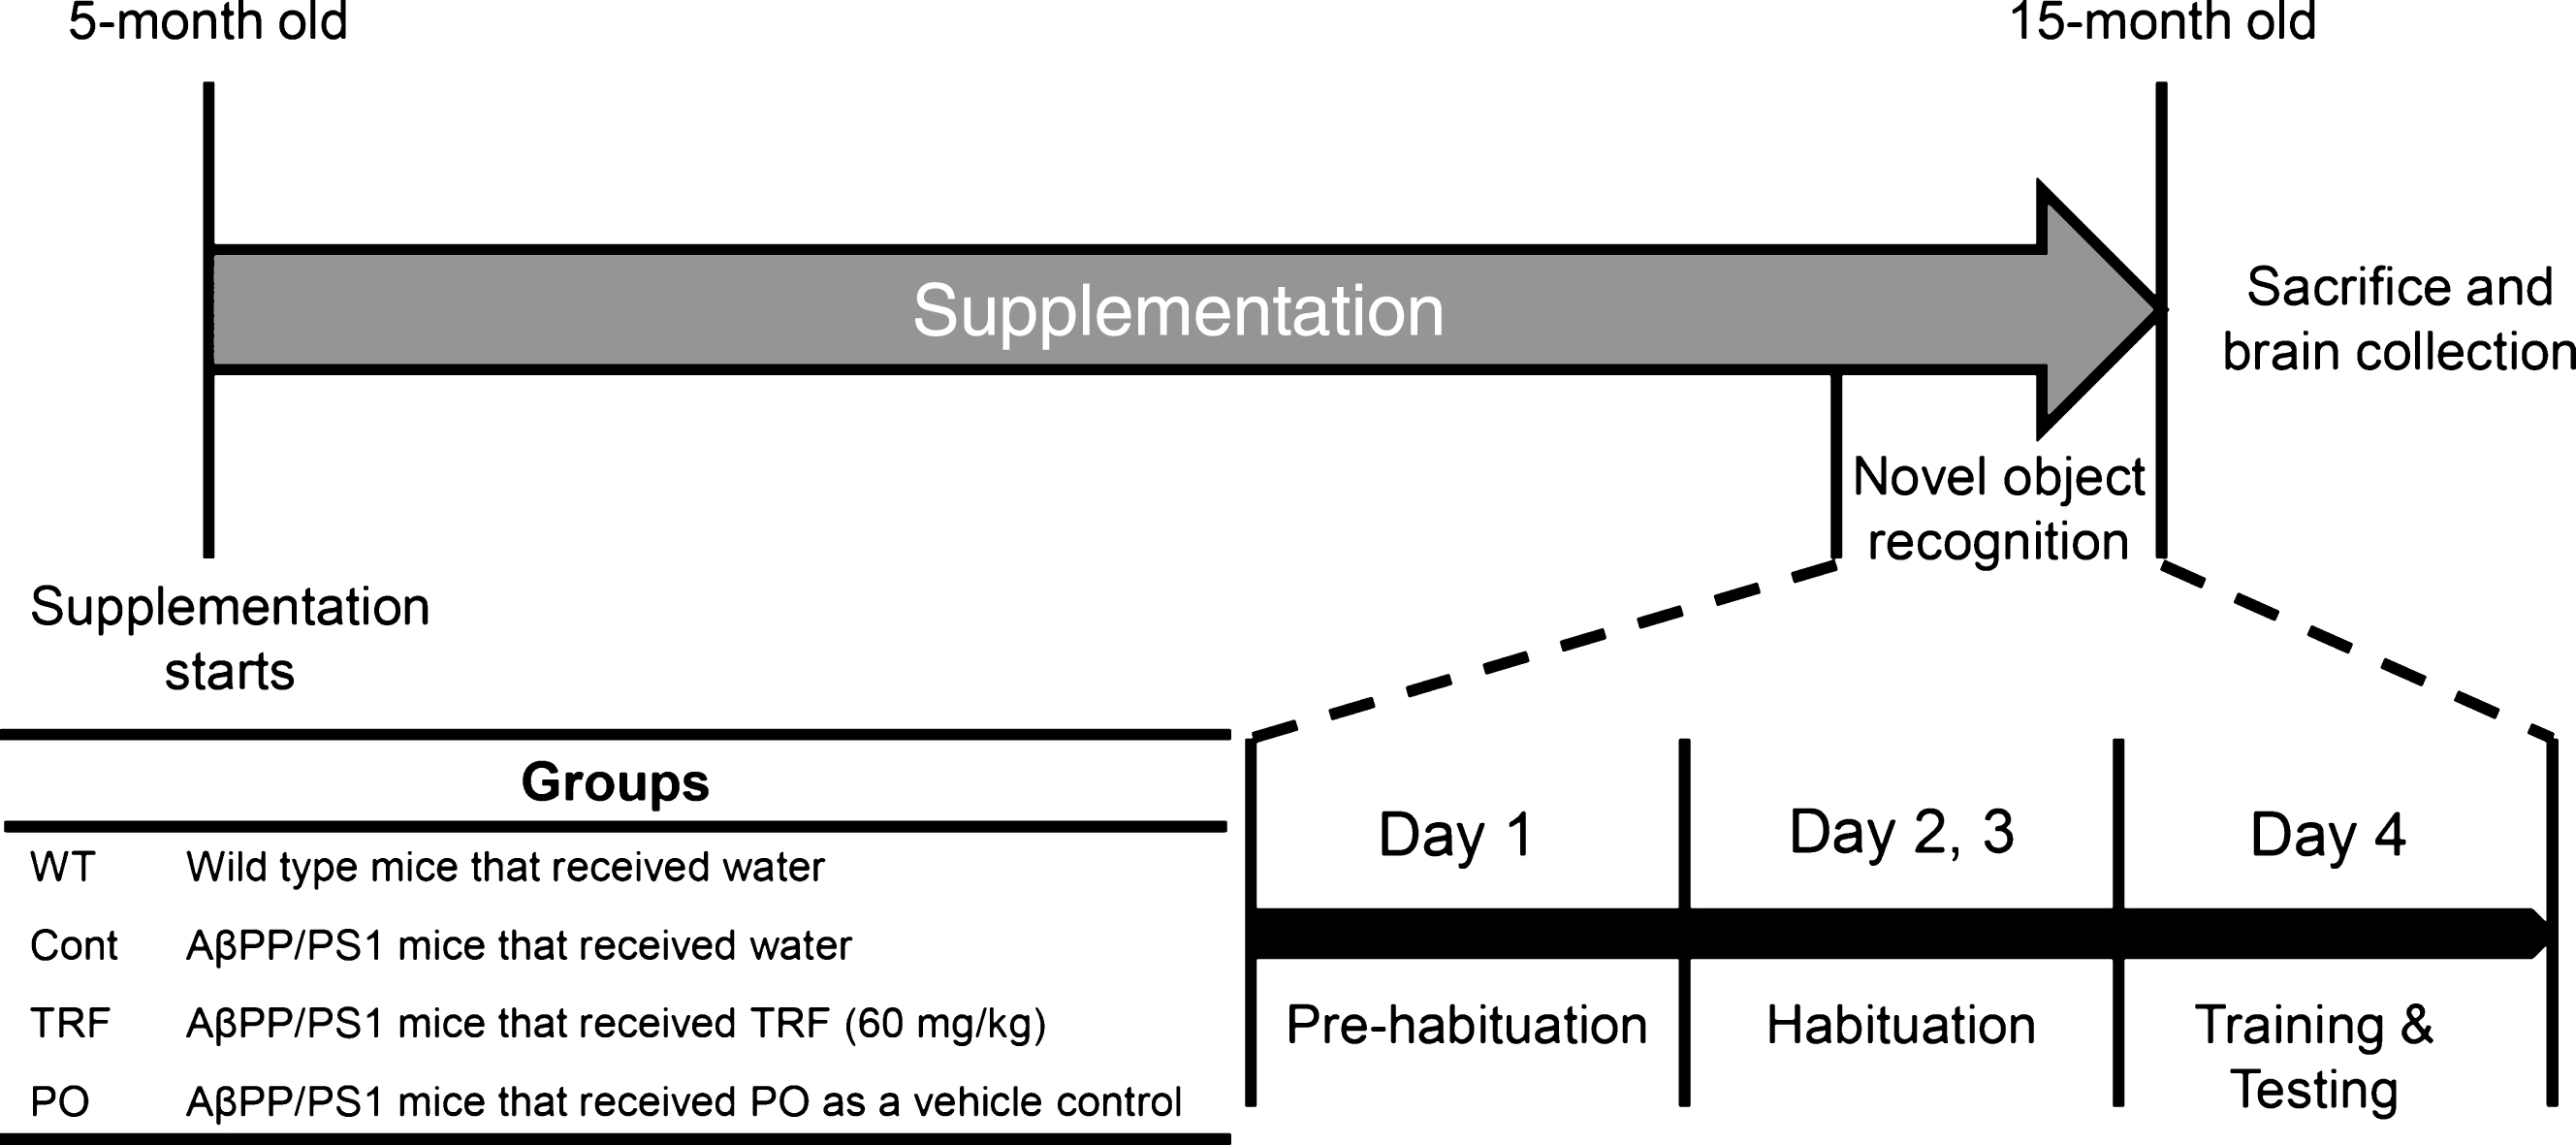 Schematic diagram of the novel object recognition procedure. Mice were divided into four groups: wild-type mice that received water (WT) and three groups of AβPP/PS1 mice that received water (Cont), tocotrienol-rich fraction (TRF), or palm oil stripped of vitamin E (PO). Daily supplementation started at 5 months and continued until 15 months of age. Four days before sacrifice and brain collection, the mice were subjected to the novel object recognition test as described in the text.